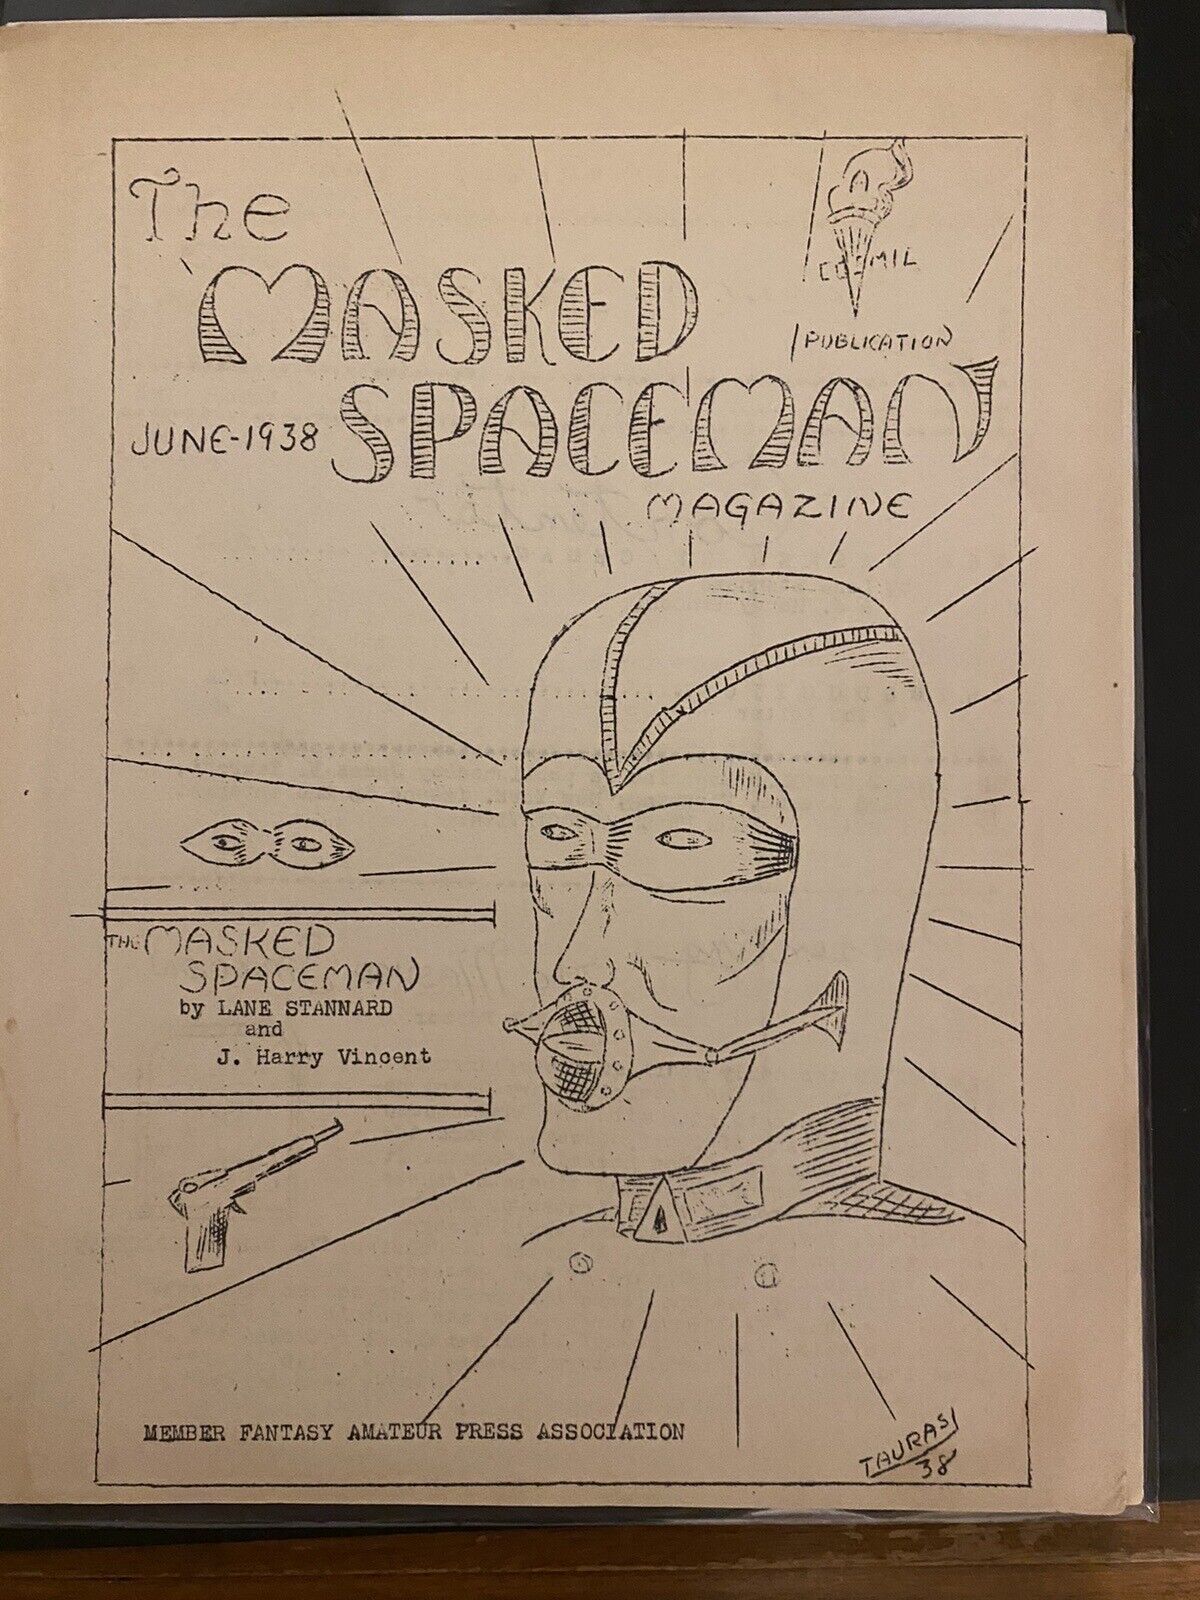 Masked Spaceman June 1938 Very Early Golden Age Comic